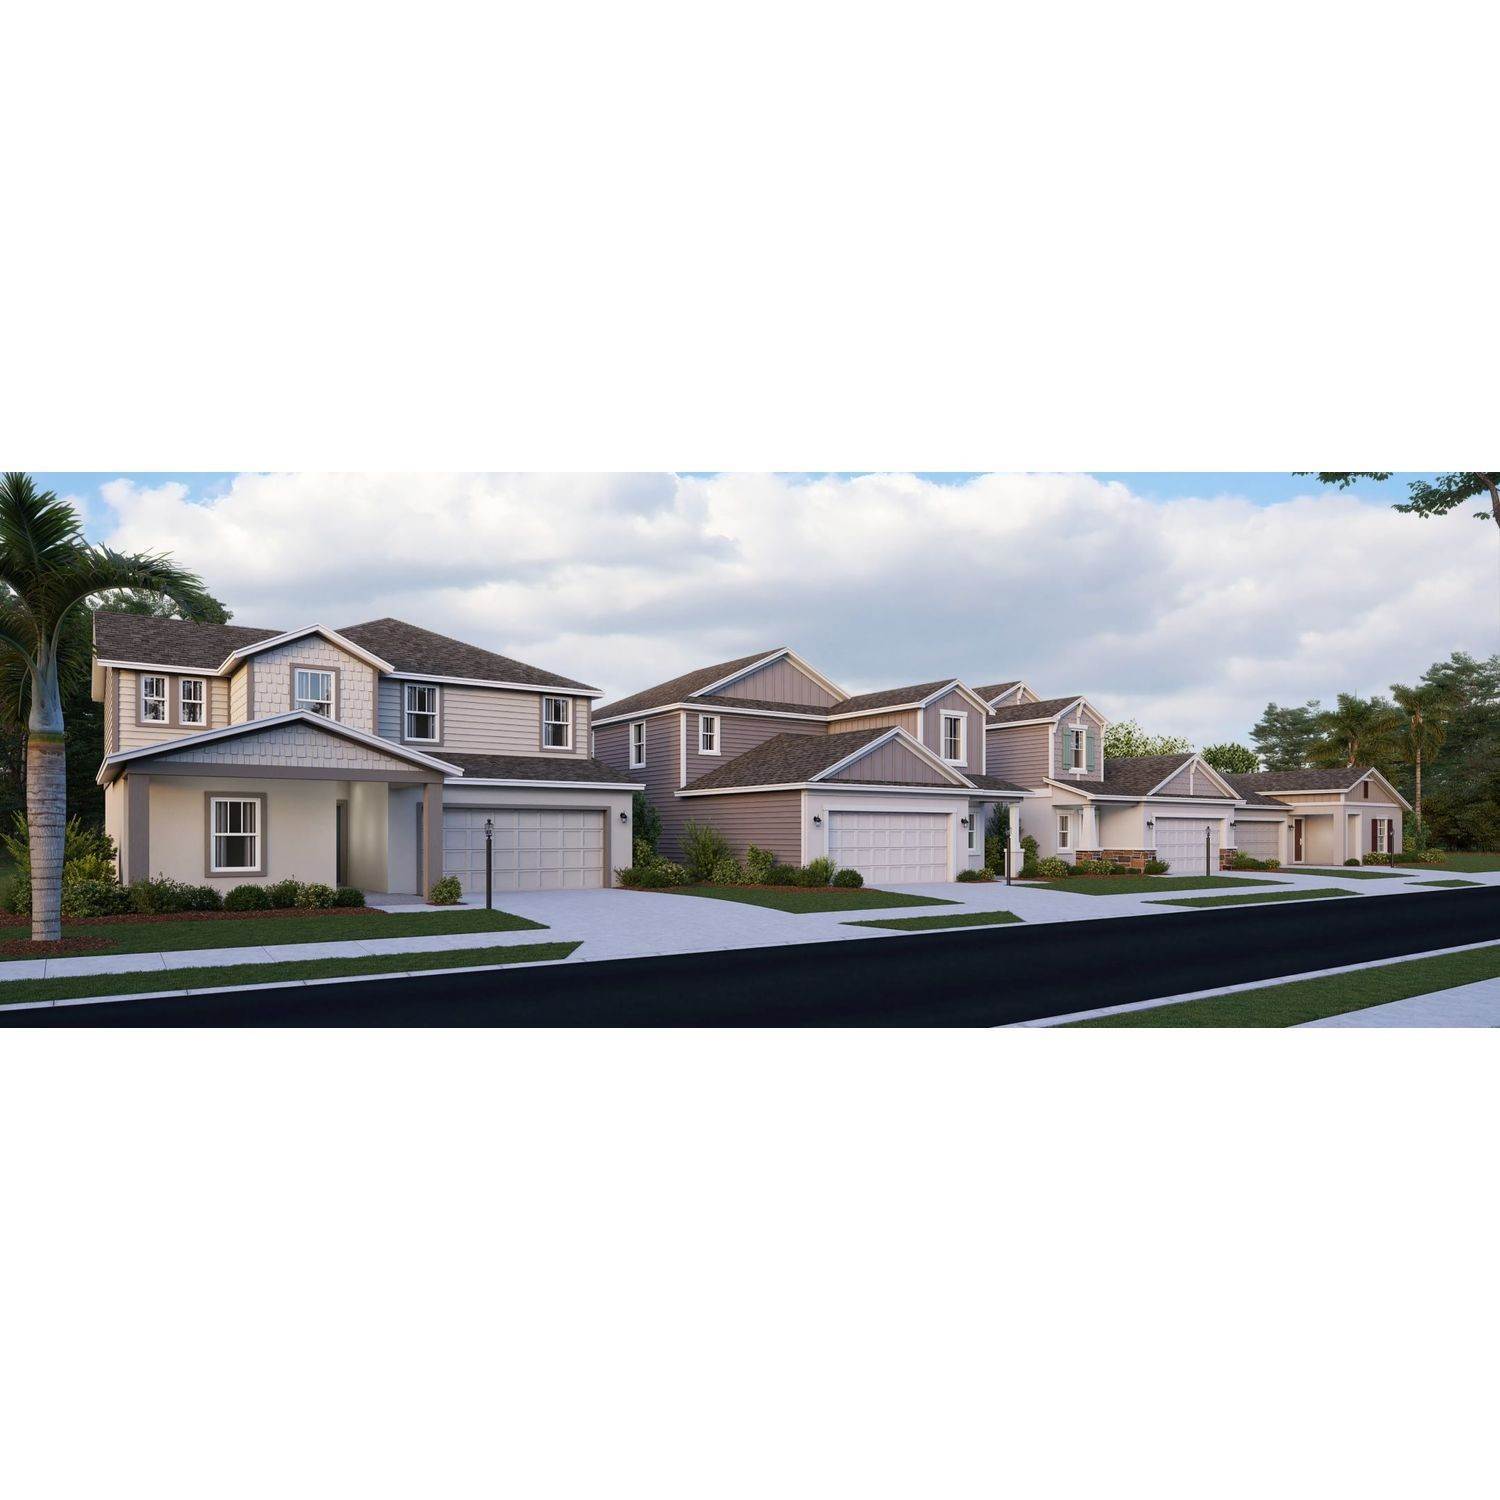 14. Ranches at Lake Mcleod - Estates Collection building at 836 Timberland Drive, Davenport, FL 33837